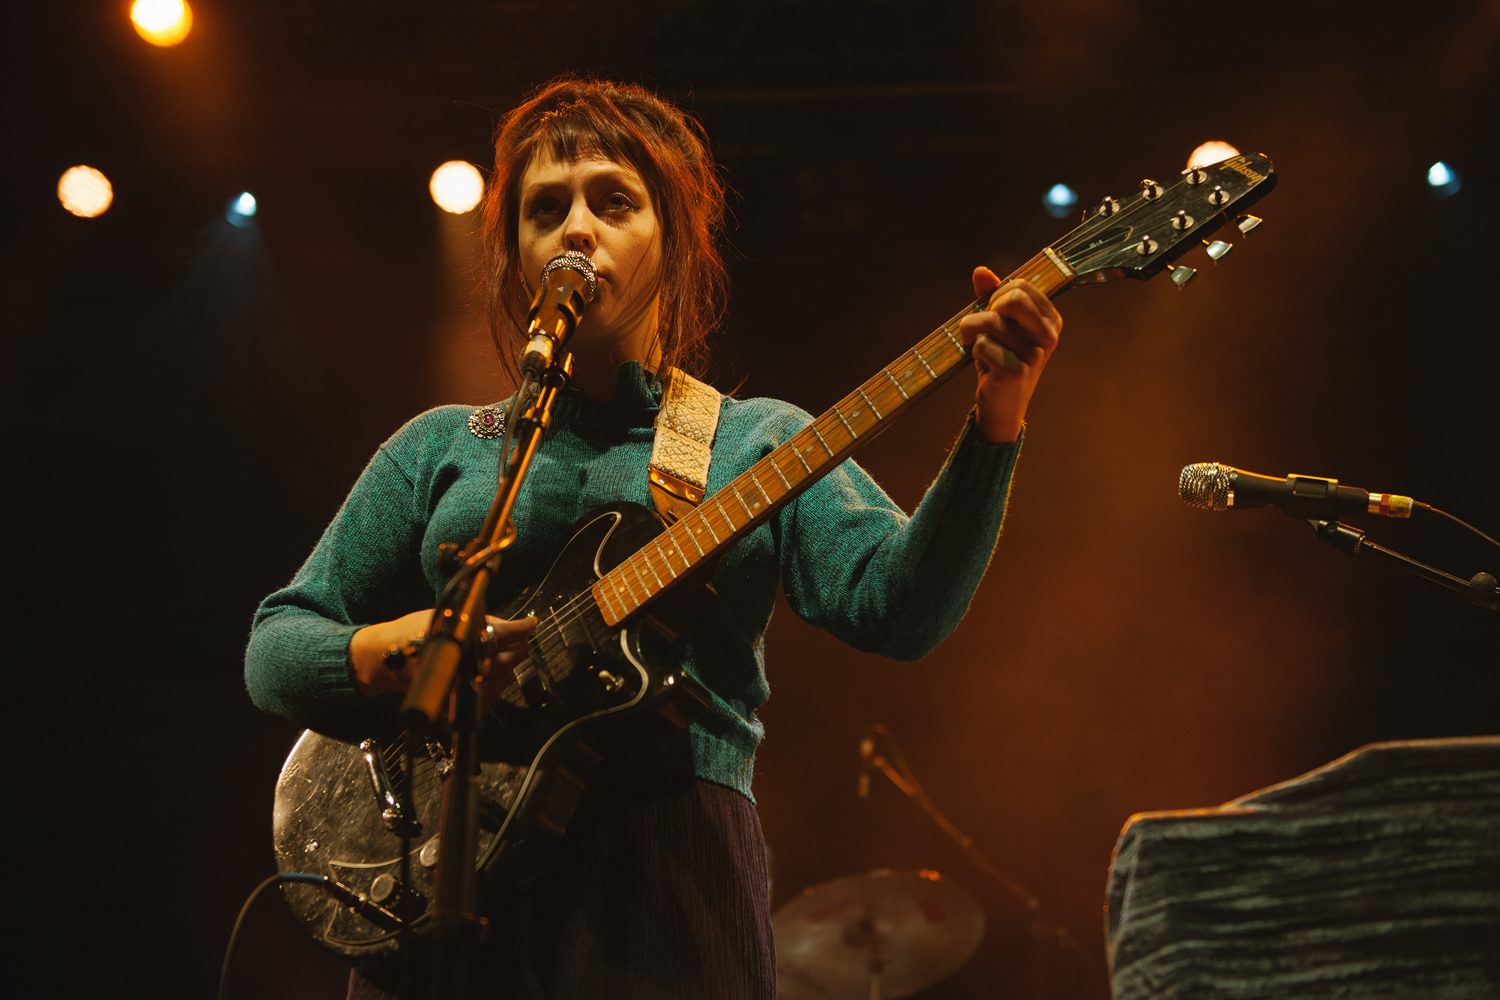 Angel Olsen, Perfume Genius and Young Thug join Way Out West